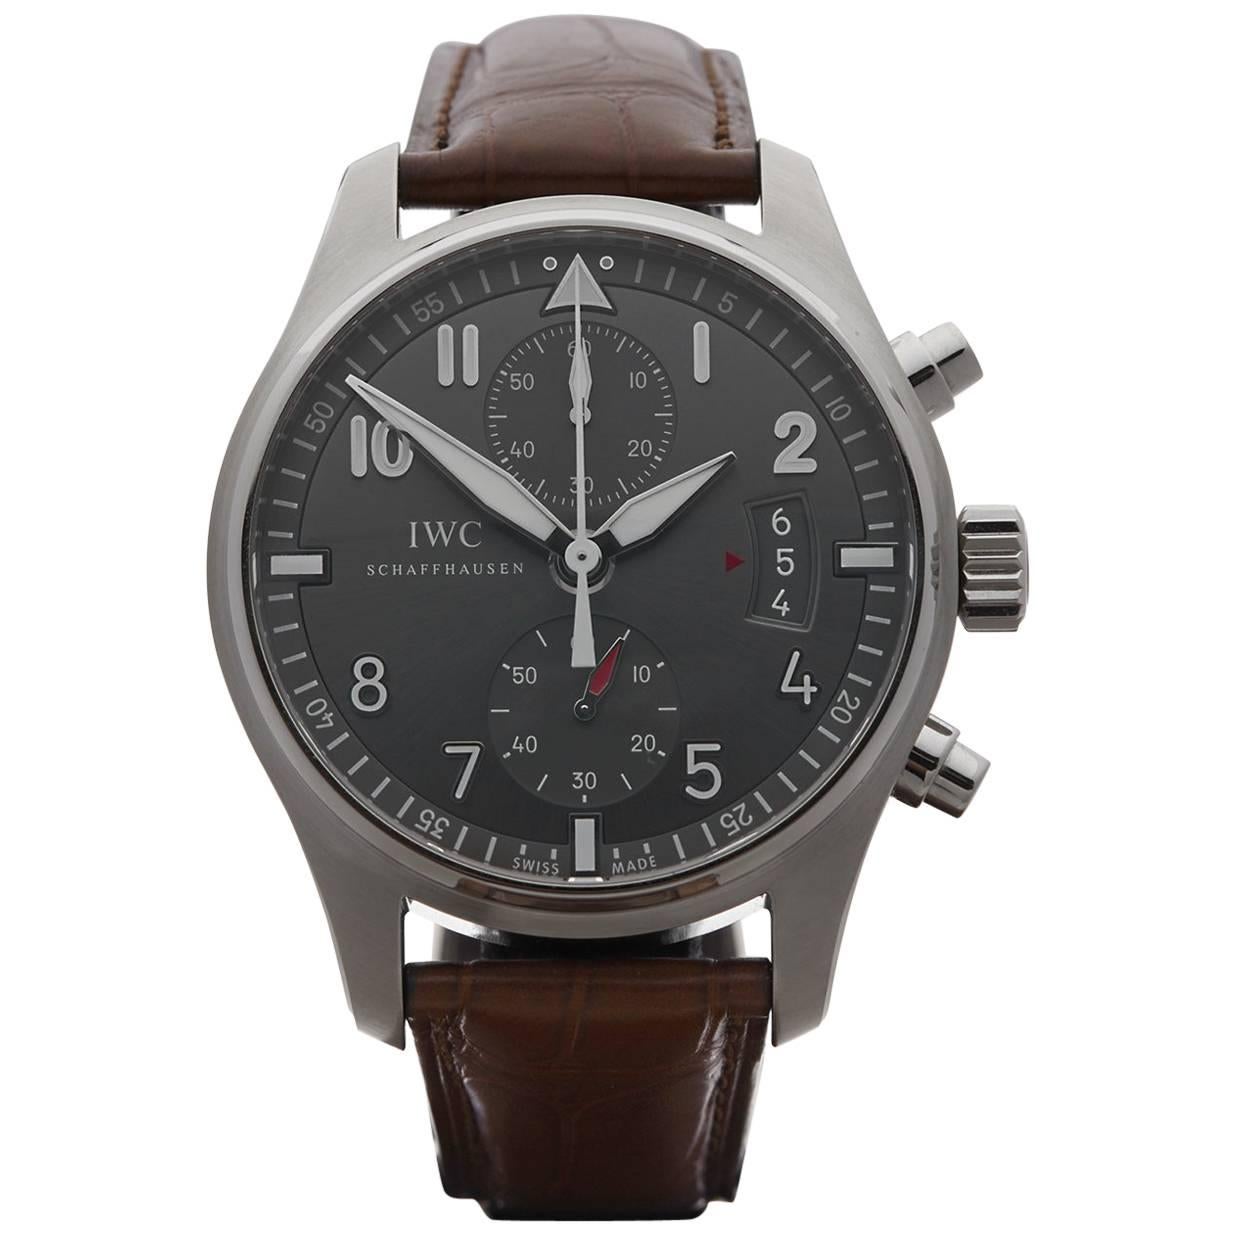 IWC Stainless Steel Pilot's Chronograph spitfire Automatic Wristwatch